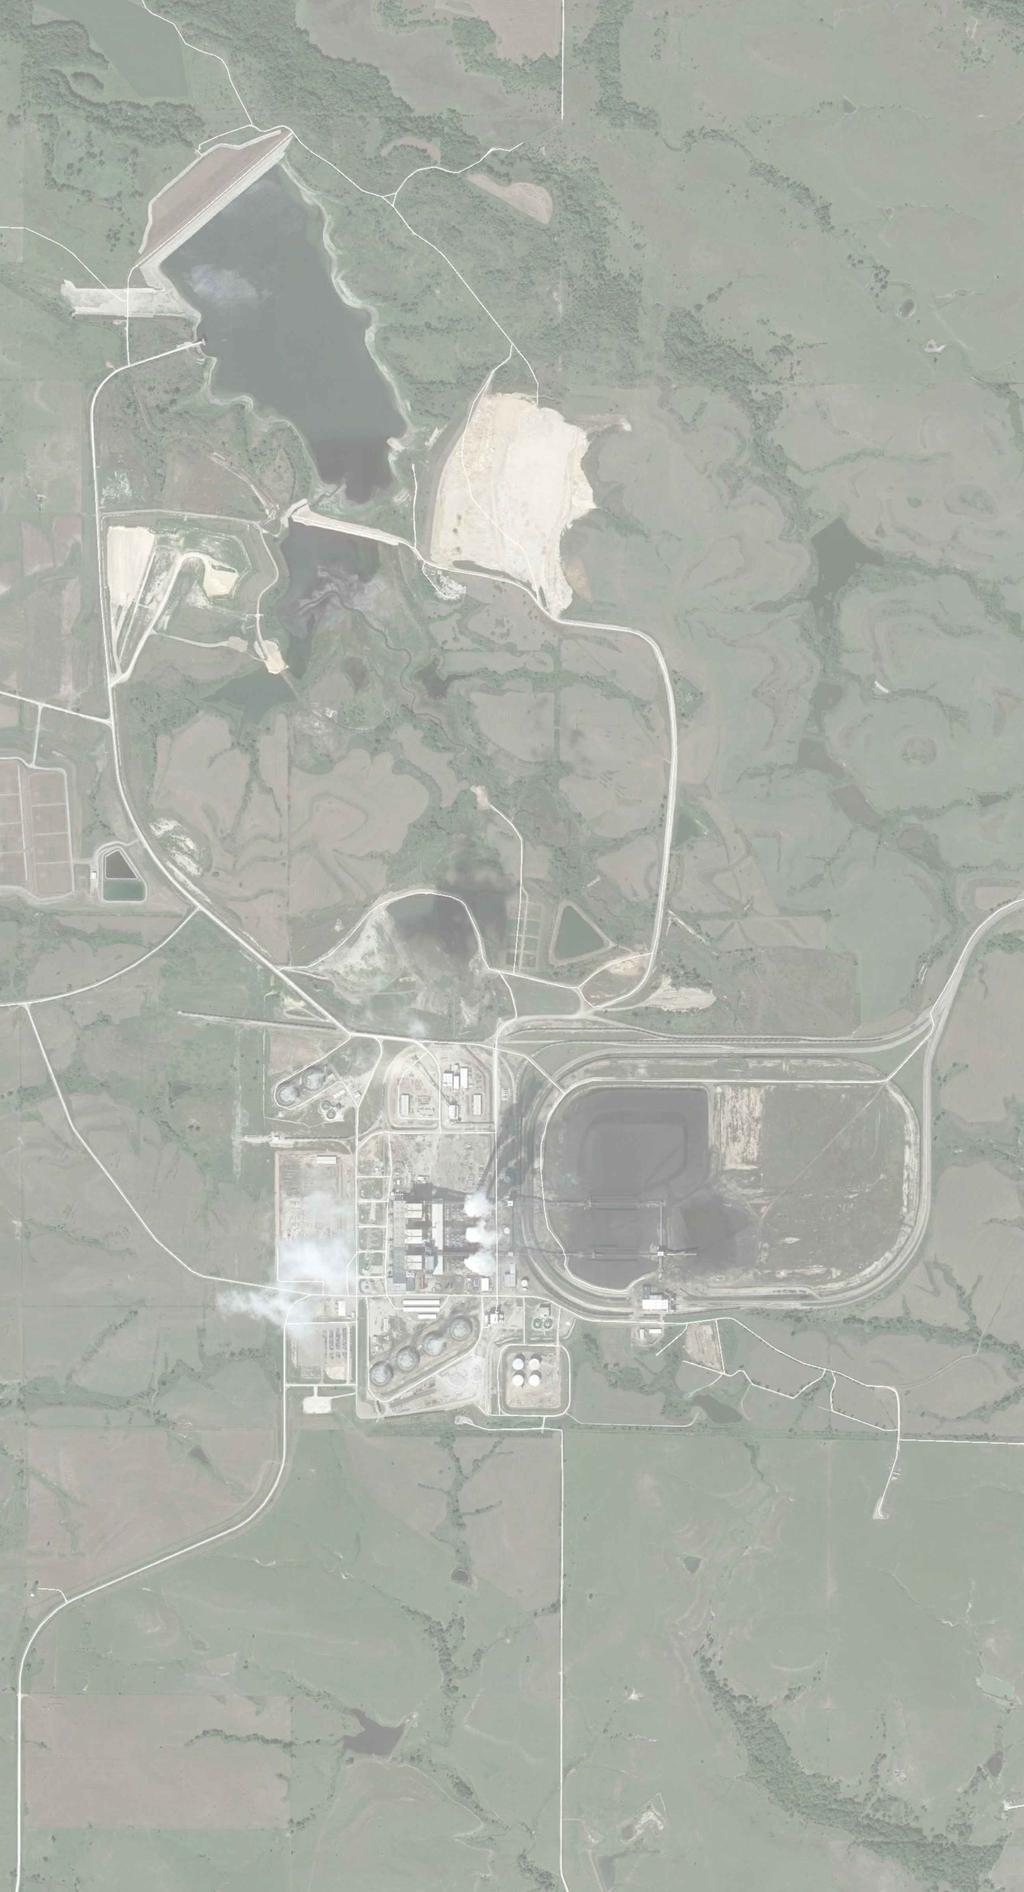 UNPAVED ROAD FLY ASH AREA 1 LANDFILL FLY ASH SILOS LUCAS, ANDY Printed: 3/14/2017 2:29 PM Layout: HA-FIG-B-L-H \\CLE\COMMON\PROJECTS\129778 - WESTAR_CCR SUPPORT\CAD\FIGURES\129778_FIG 2_JEFFREY CCR